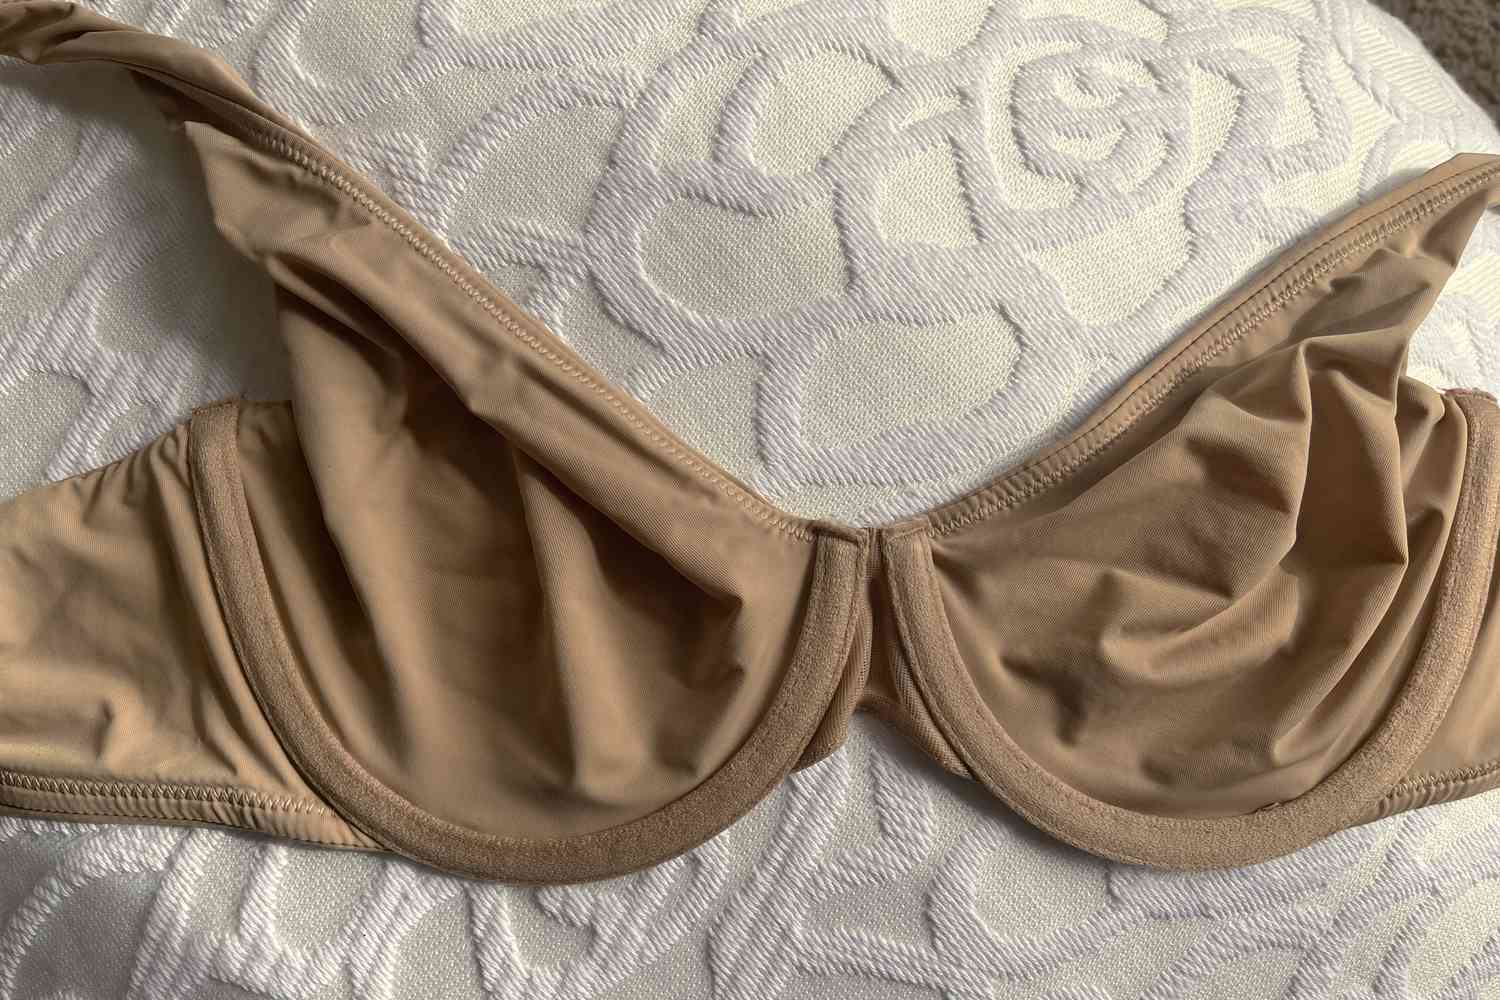 A brown colored bra on a patterned background